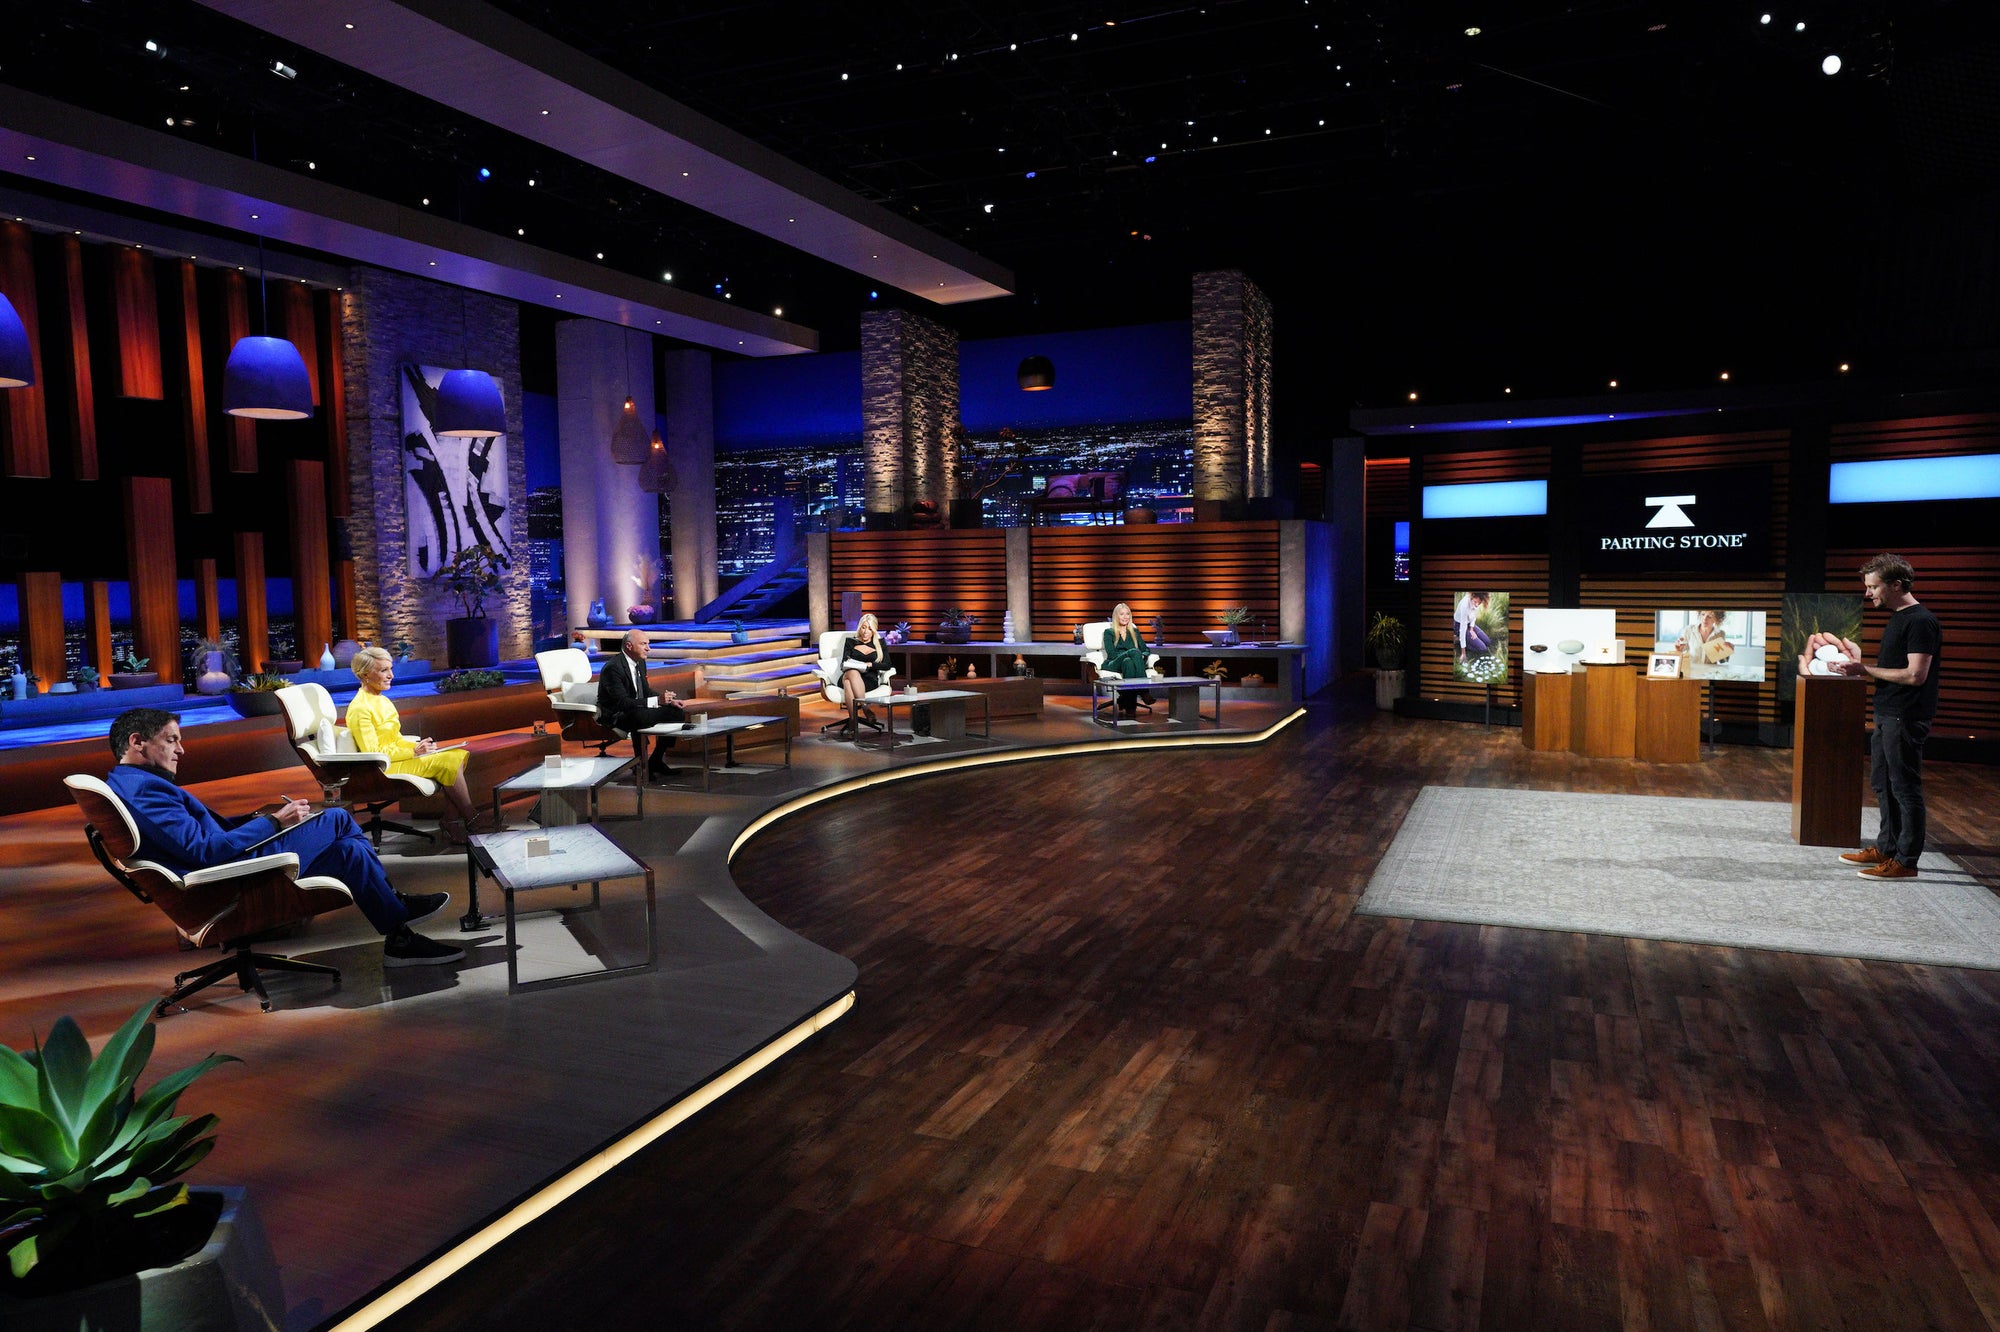 Parting Stone on Shark Tank - The Pre-airing Inside Story!